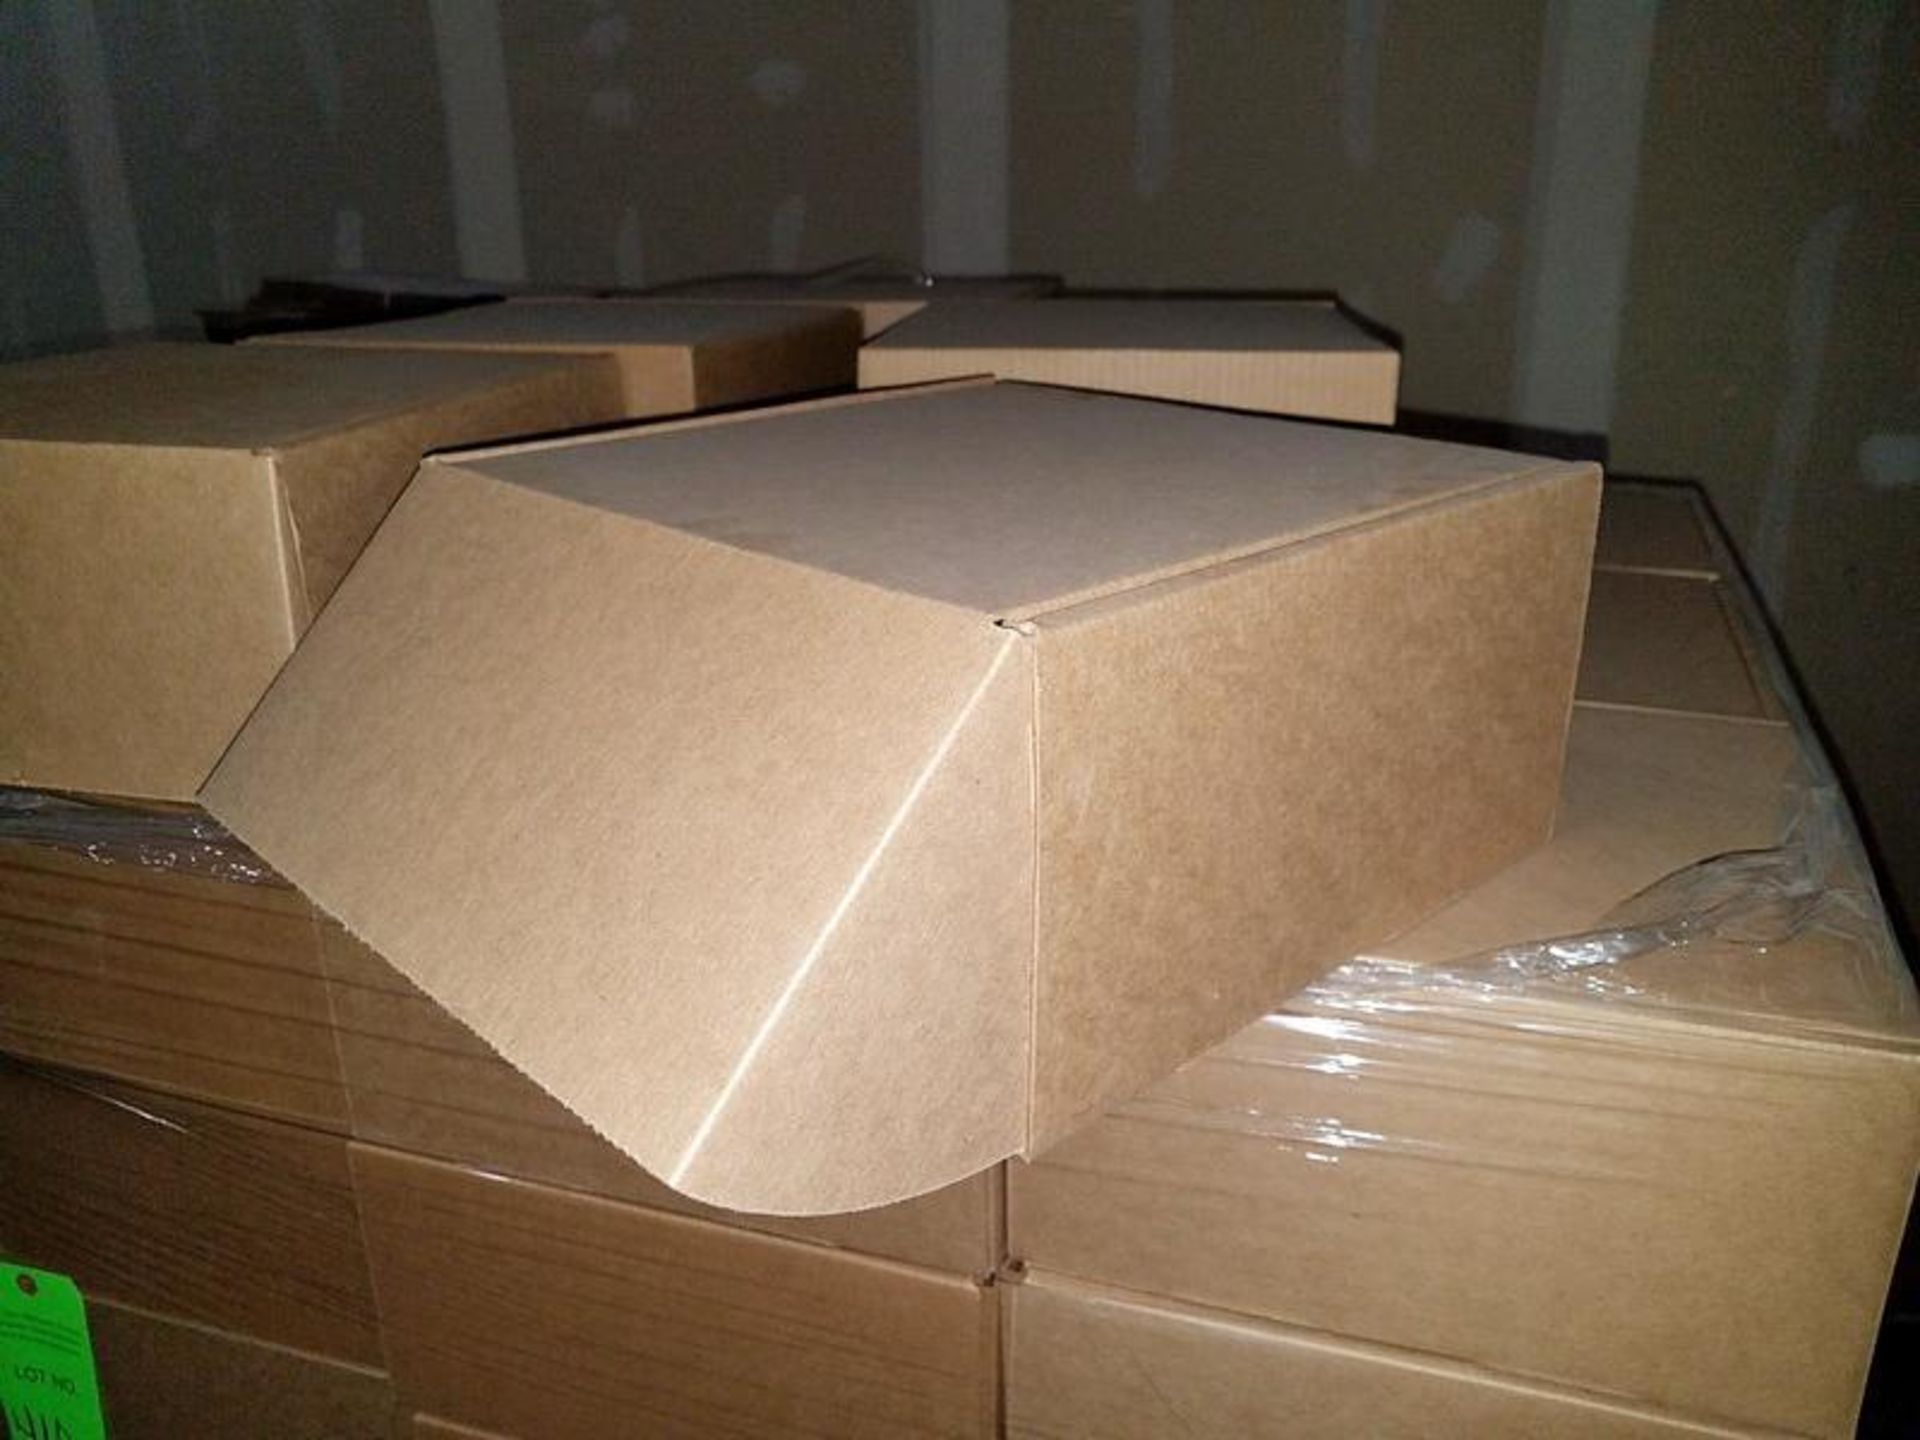 Lot of (95) Corrugated Boxes, Approx. 12.5" x 13" x 6" - Image 3 of 3